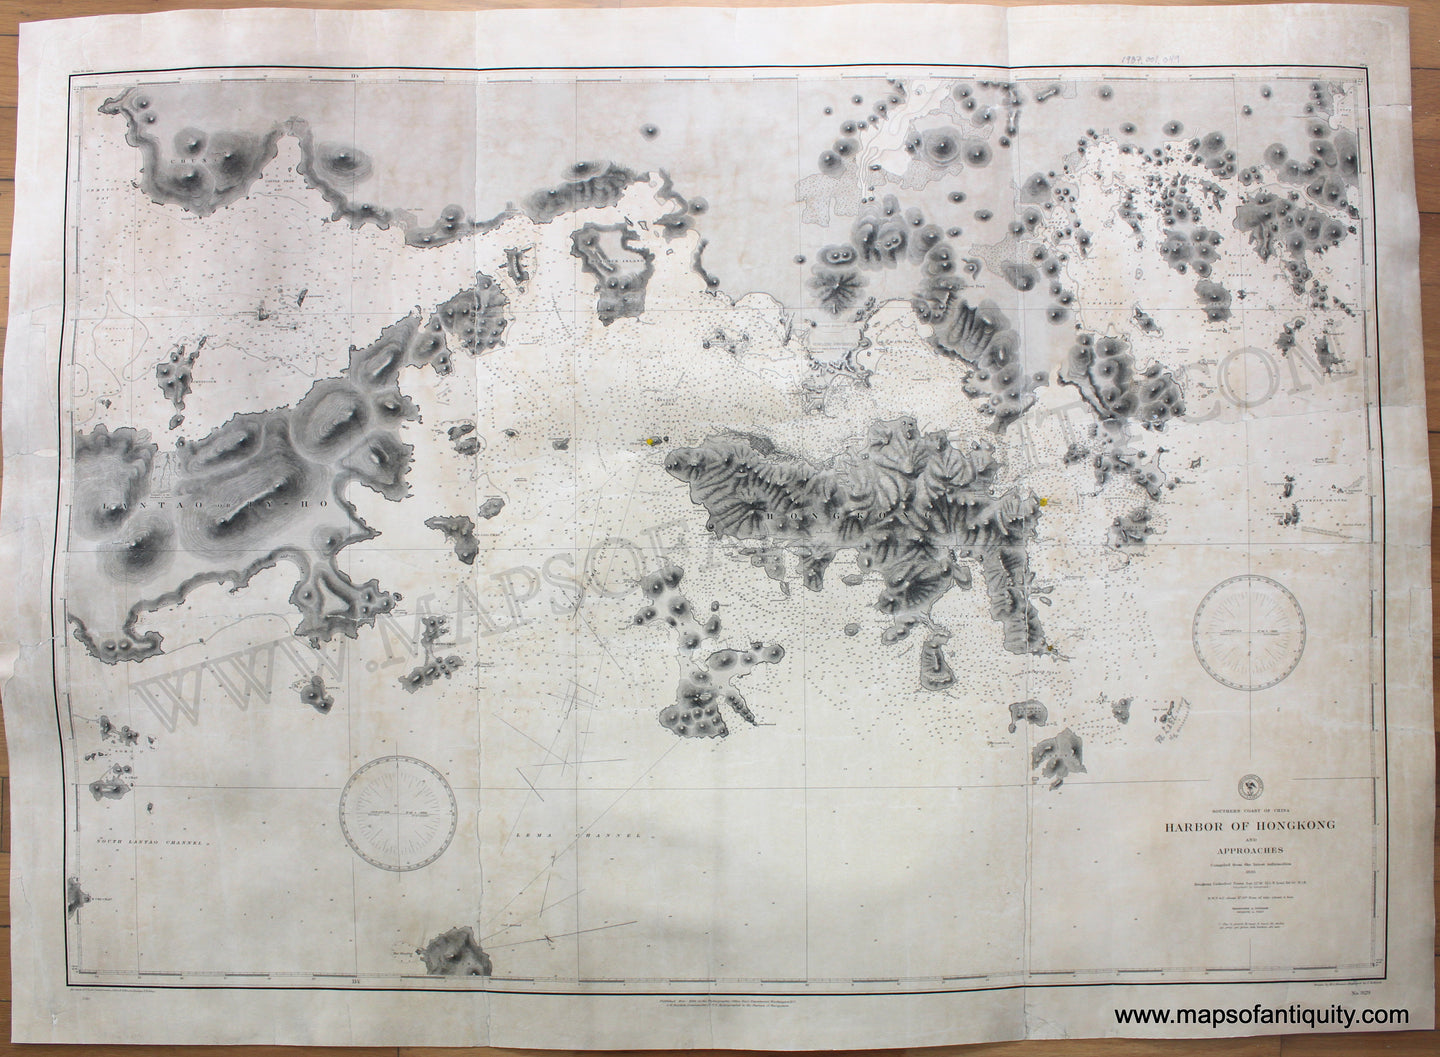 Antique-Nautical-Chart-Harbor-of-Hong-Kong-and-Approaches-1886-US-Navy-Hydrographic-Office-Asia-Charts-1800s-19th-century-Maps-of-Antiquity